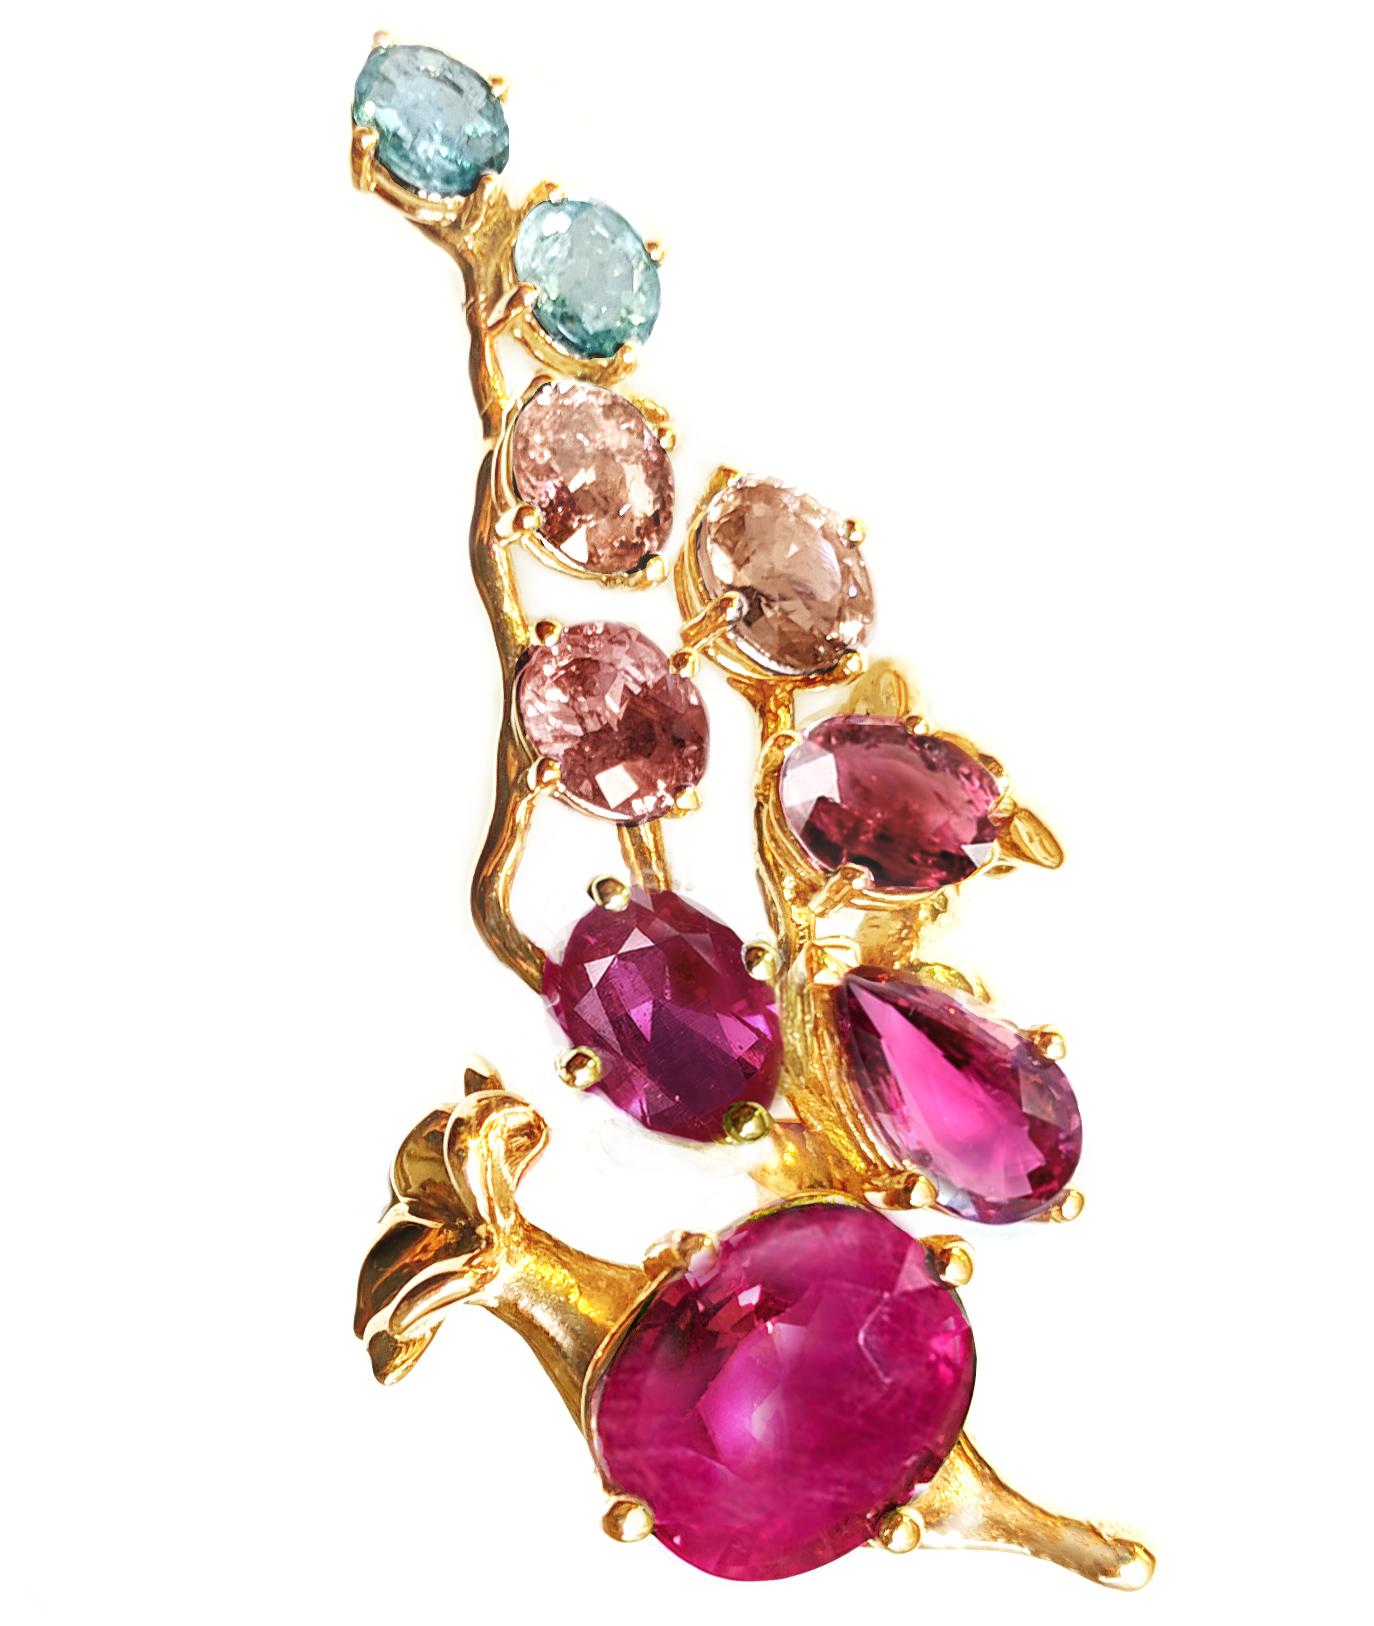 Oval Cut Eighteen Karat Yellow Gold Pink Sapphires Pendant Necklace with Malaya Garnets For Sale